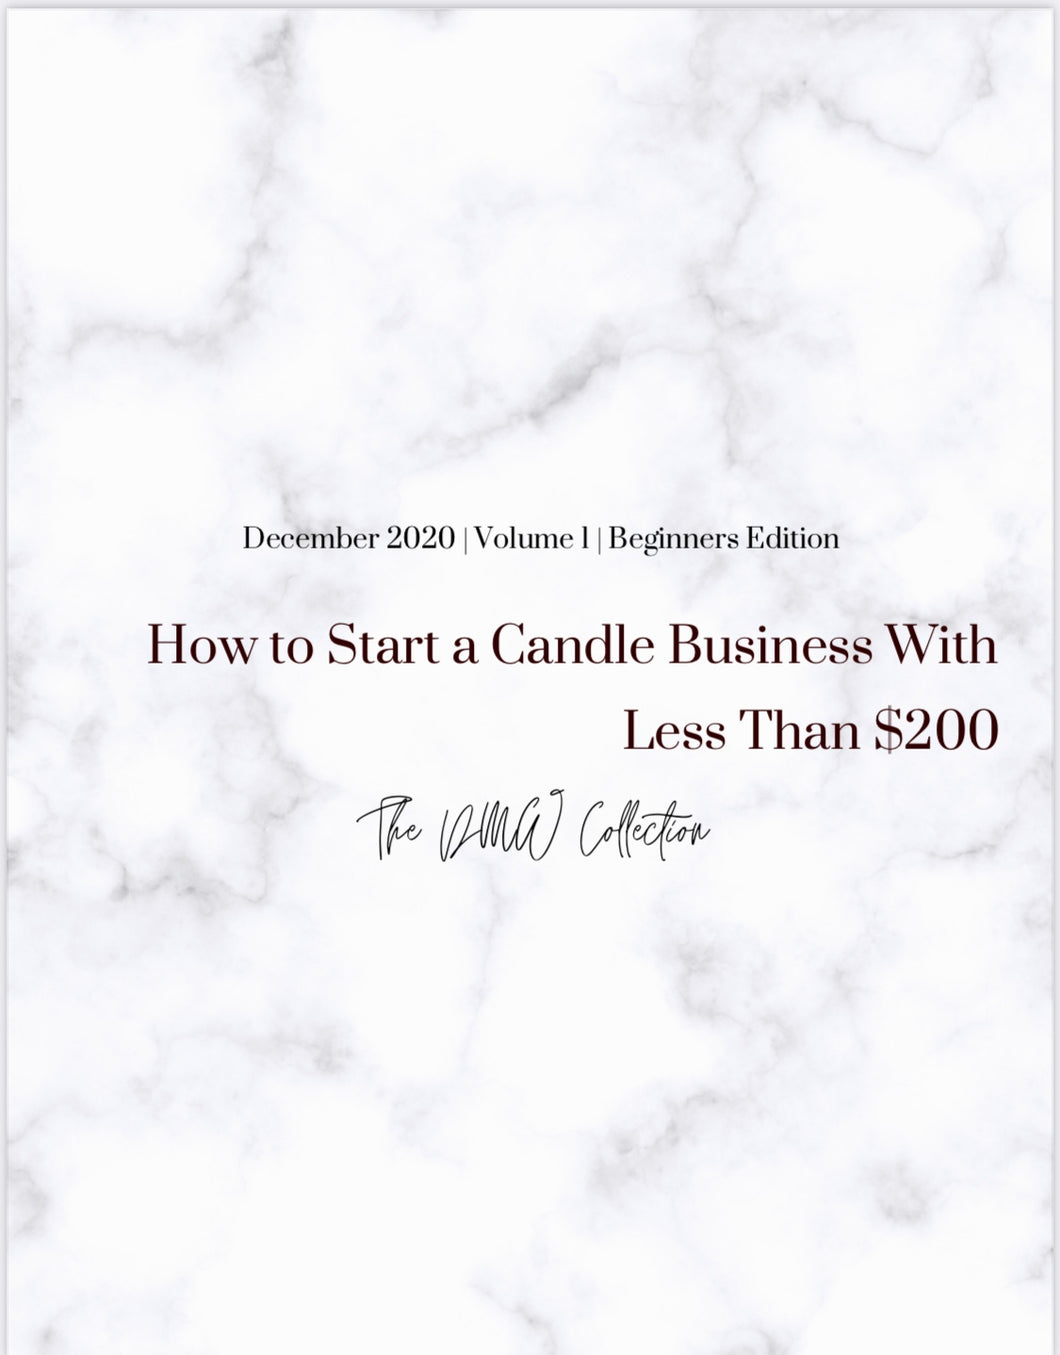 How To Start A Candle Business With Less Than $200